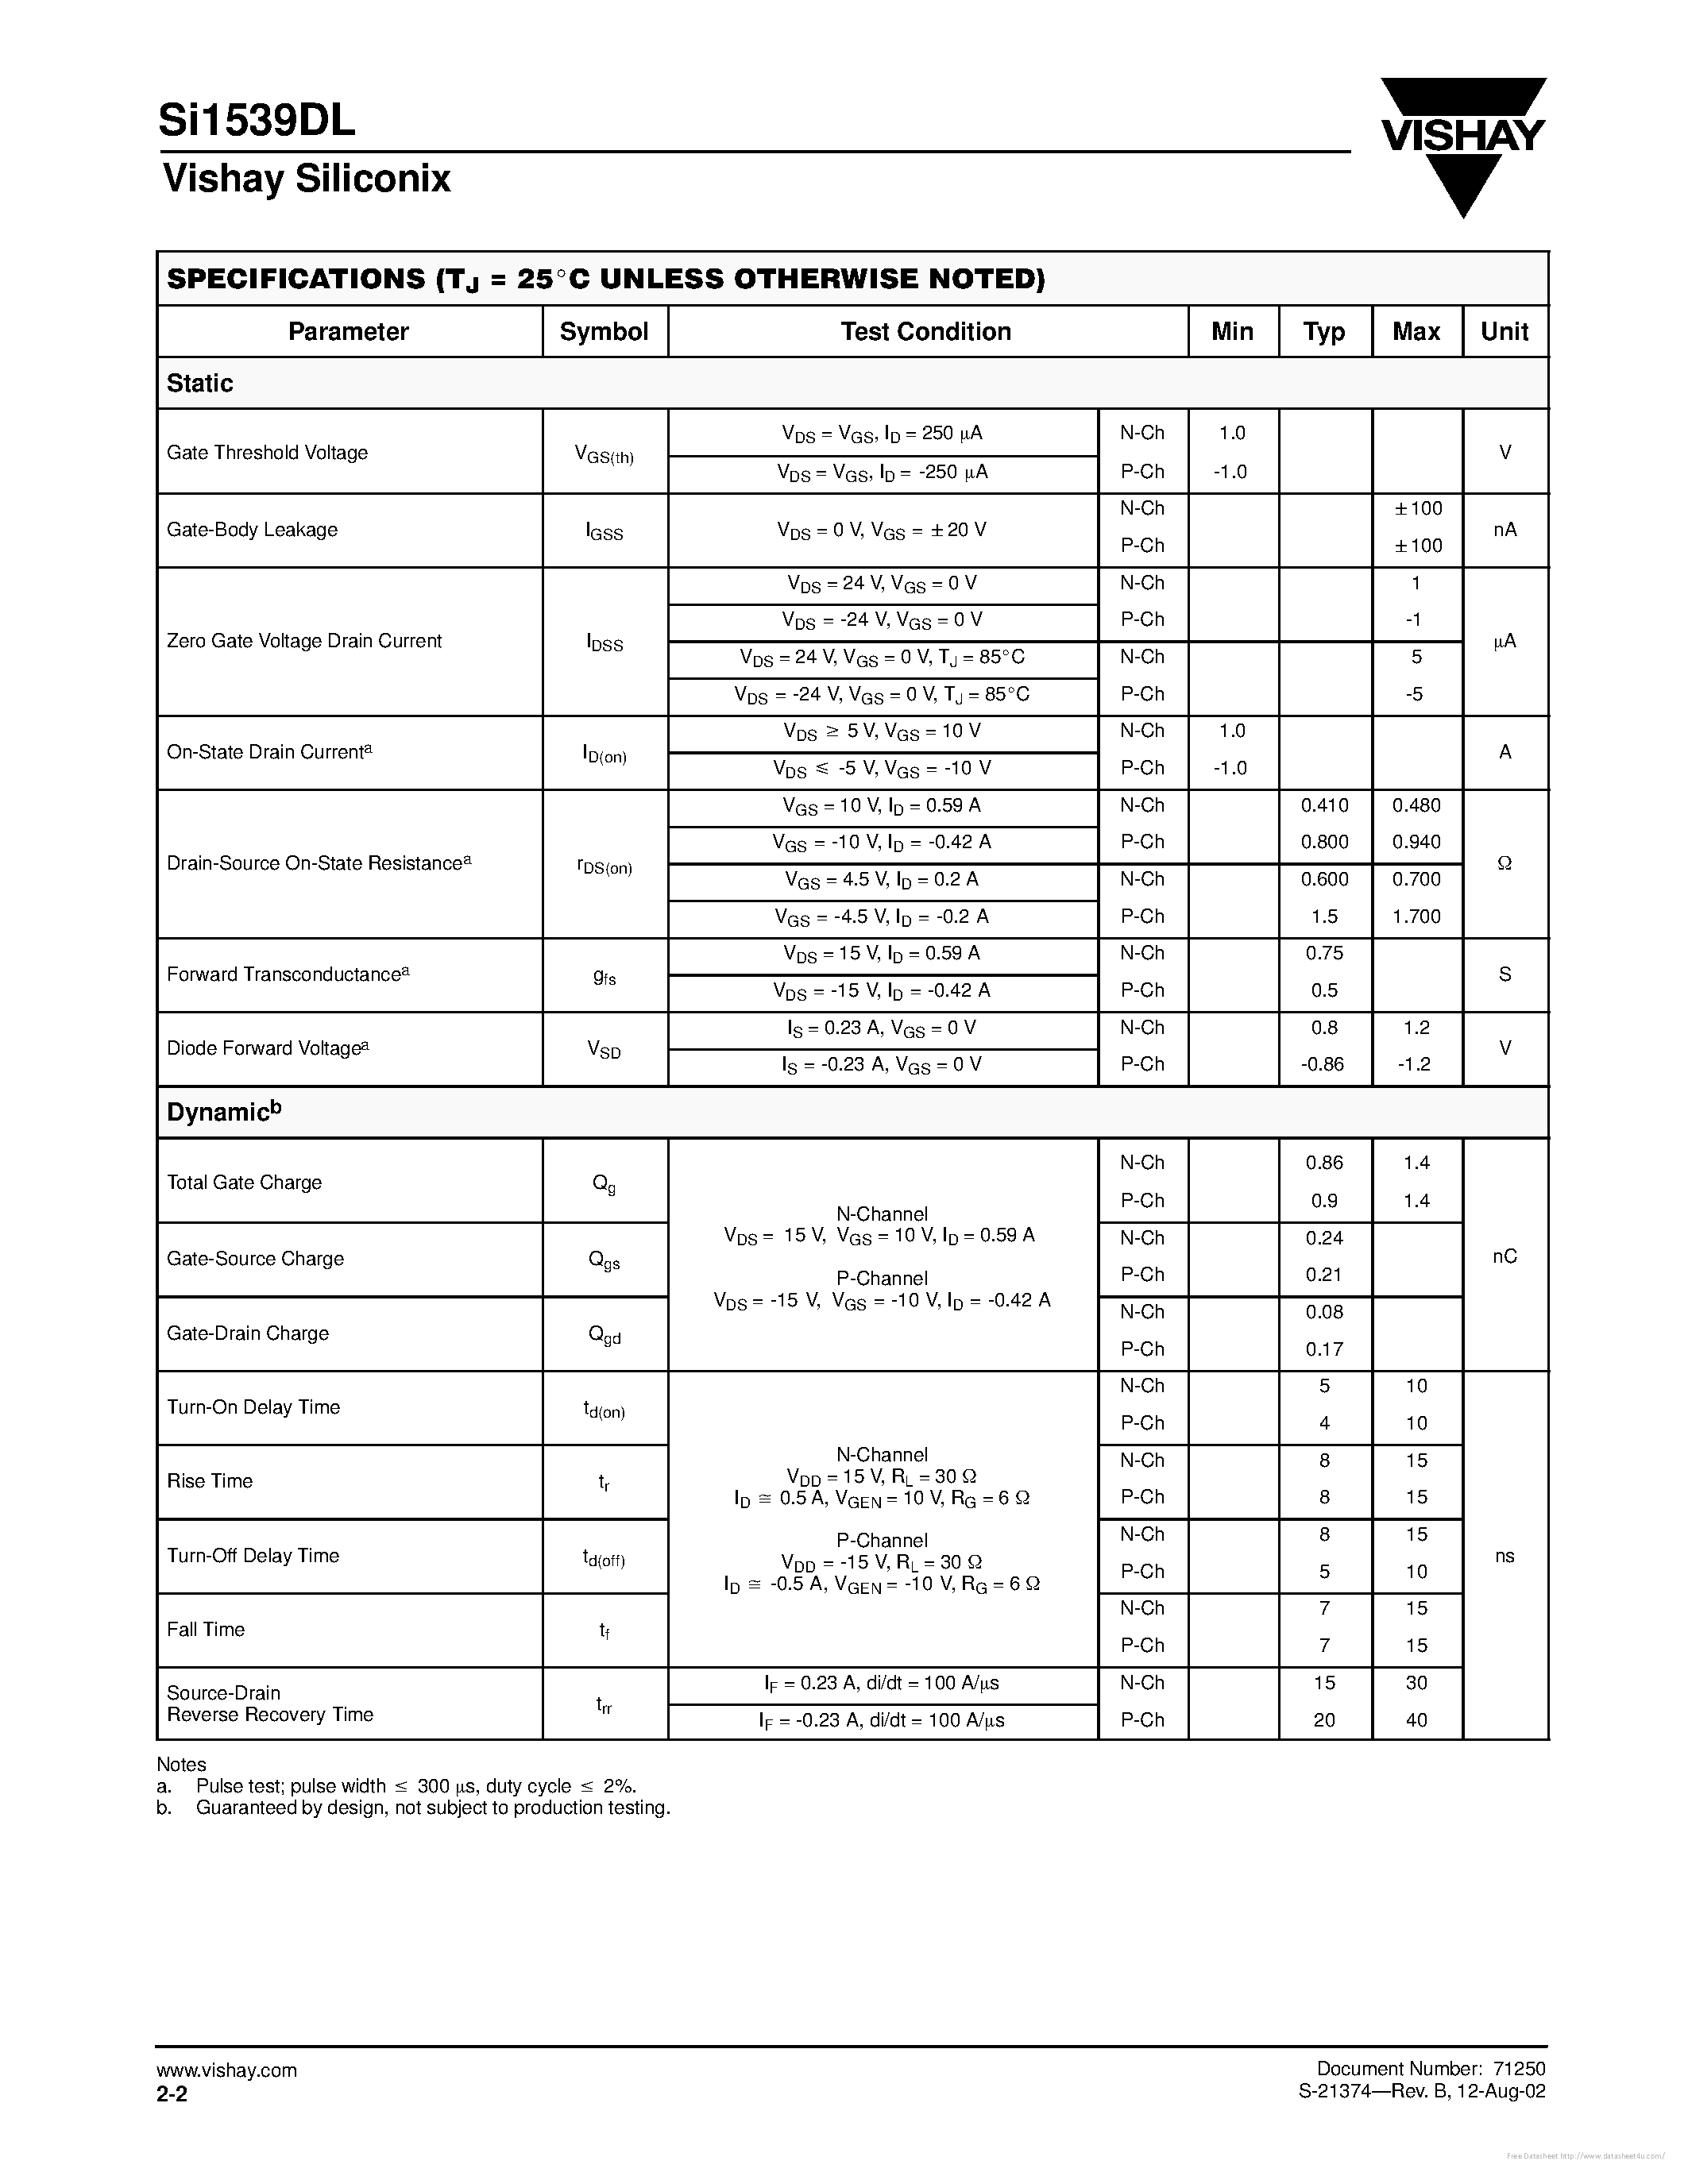 Datasheet SI1539DL - page 2